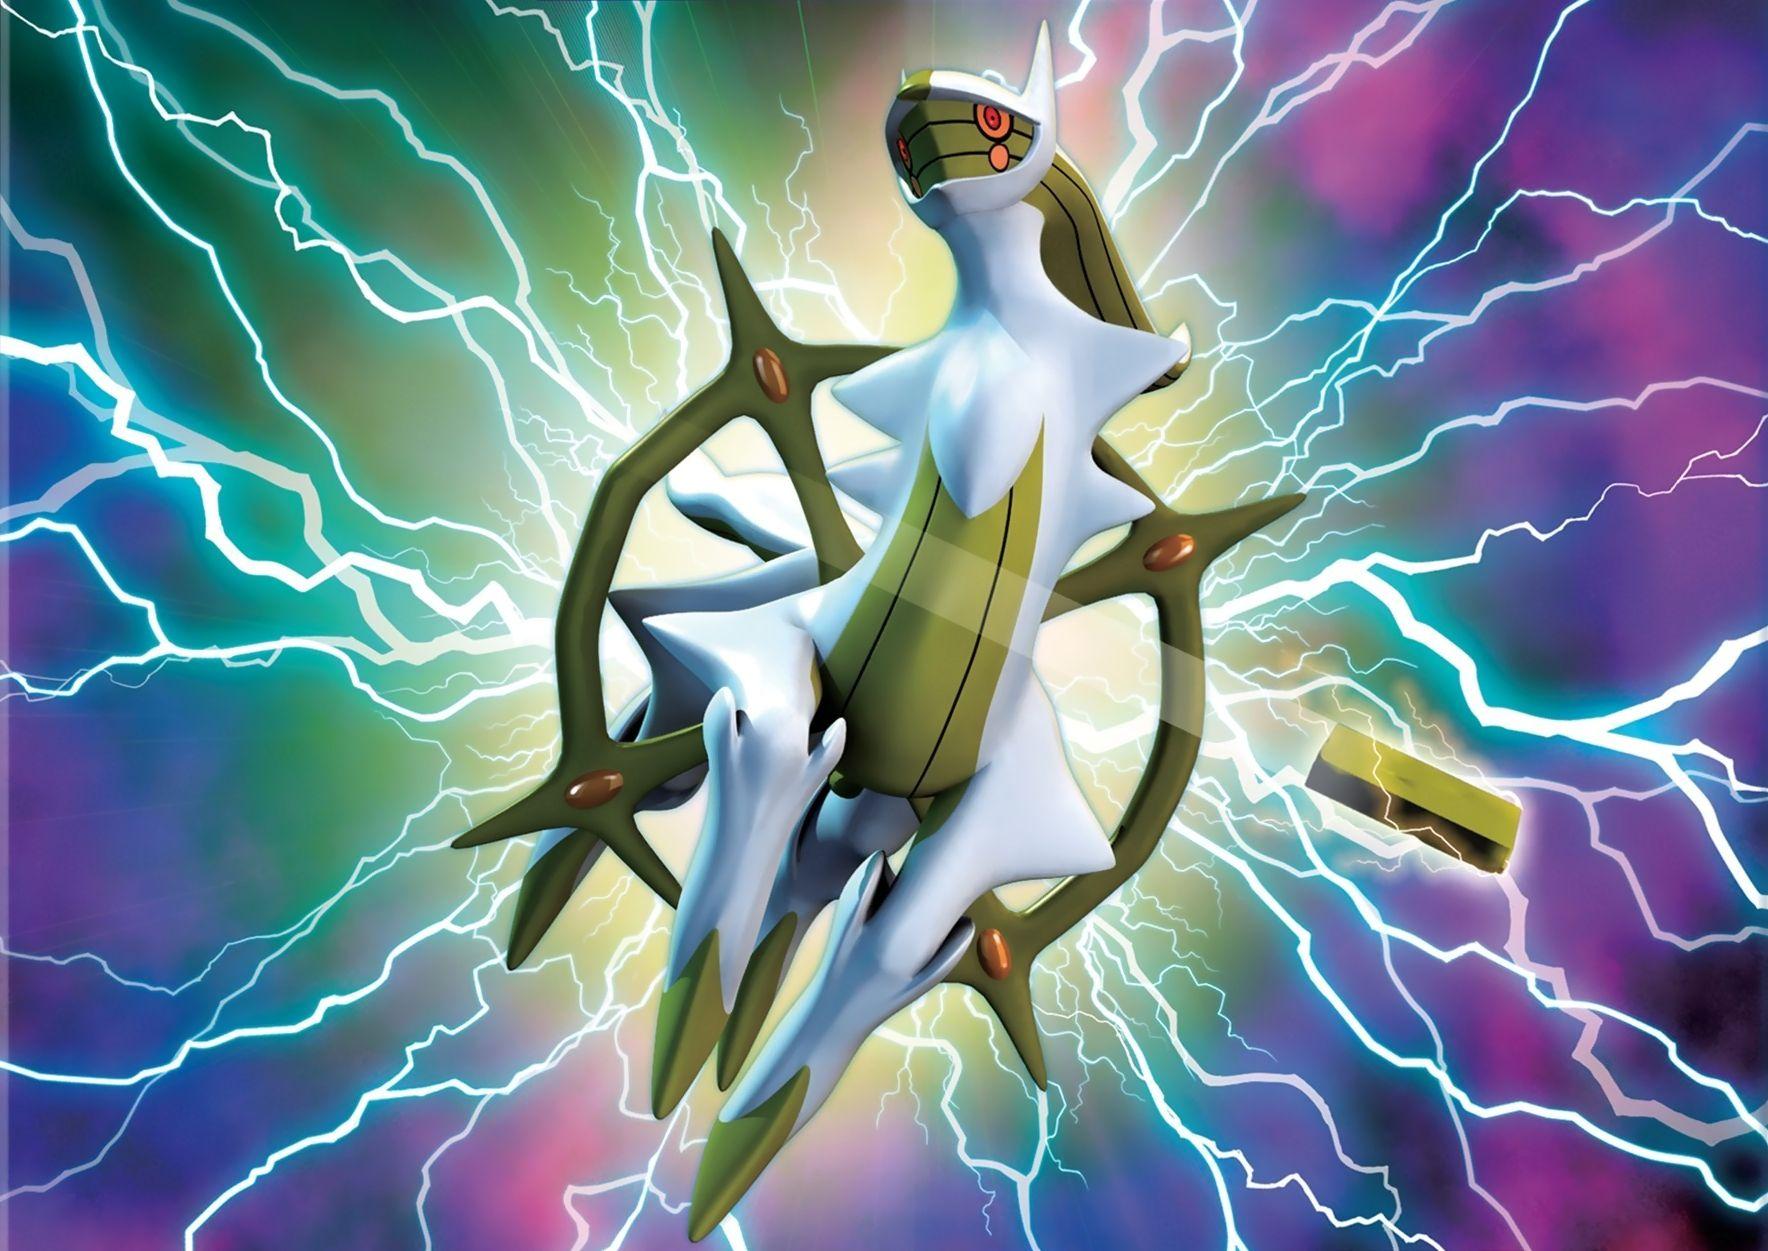 Wallpaper.wiki Awesome Arceus Image PIC WPC0011771